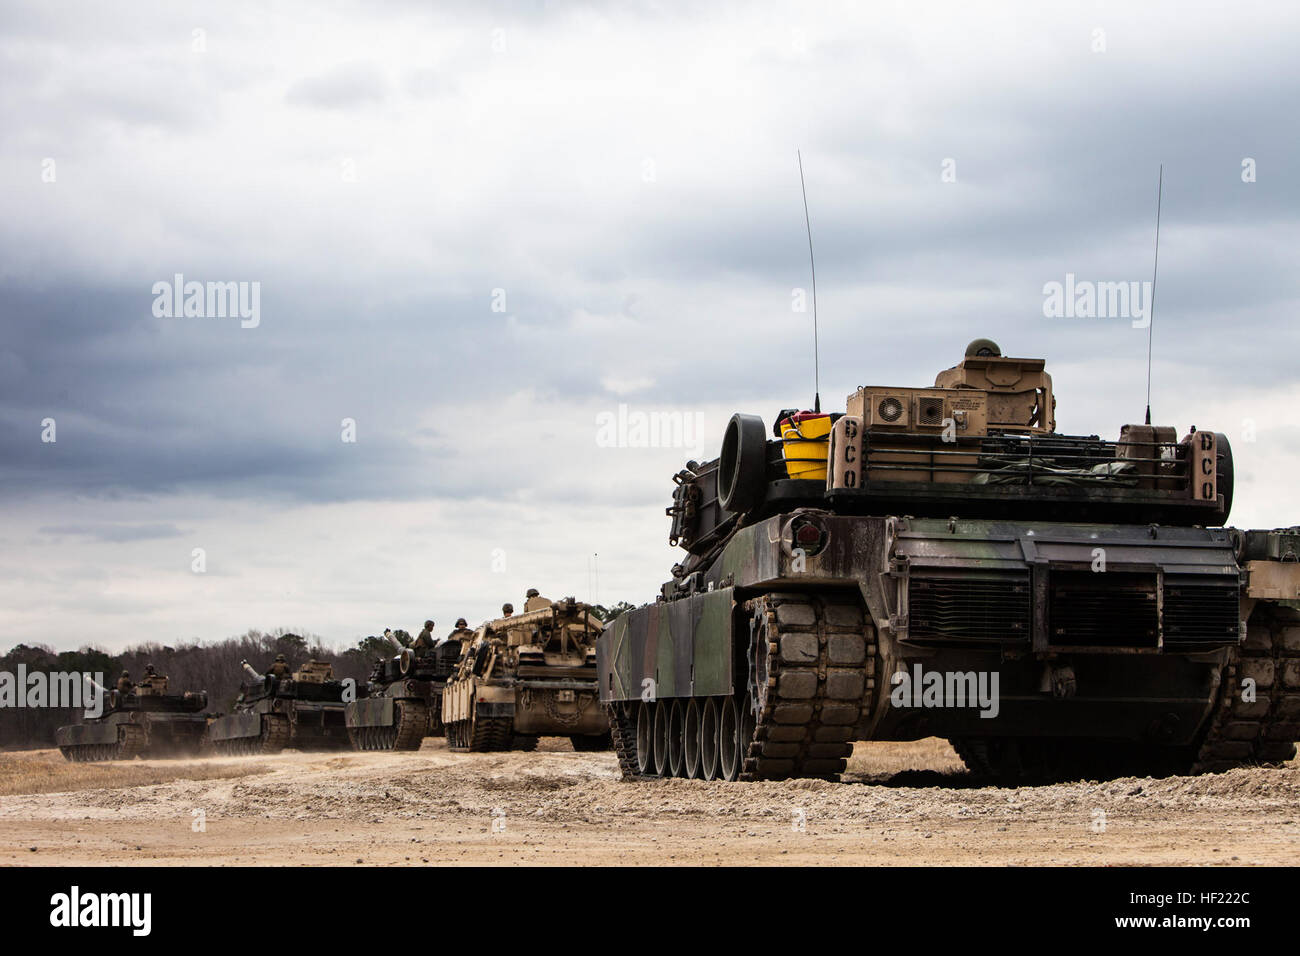 U.S. Marine Corps M1A1 Abrams tanks and an M88 A2 Hercules Recovery Vehicle roll out from the railhead to the tank ramp during a Deployment for Training (DFT) Exercise at Fort Pickett, Va., March 28, 2014. The DFT is conducted to strengthen the unit's proficiency in a combat environment.  (U.S. Marine Corps photo by Lance Cpl. Kelly Timney, 2nd MarDiv, Combat Camera/Released) 2nd Tank Battalion Deployment for Training Exercise (DFT) 140328-M-OU200-279 Stock Photo